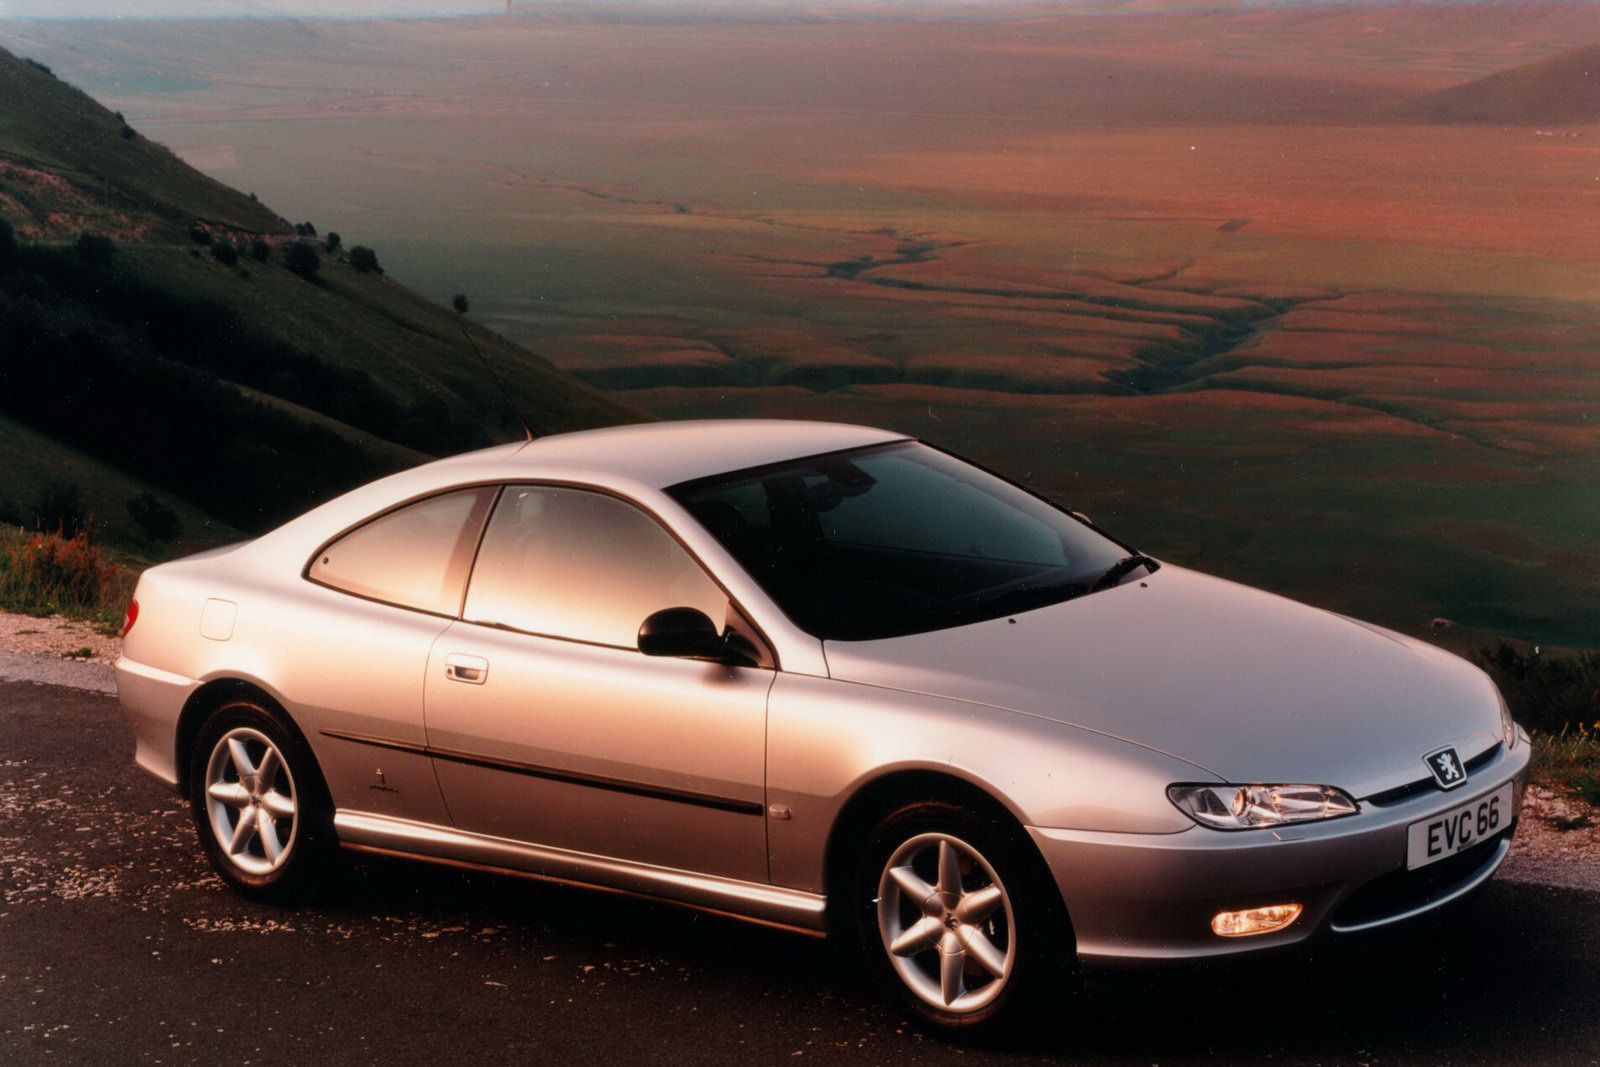 1997 Peugeot 406 Coupe